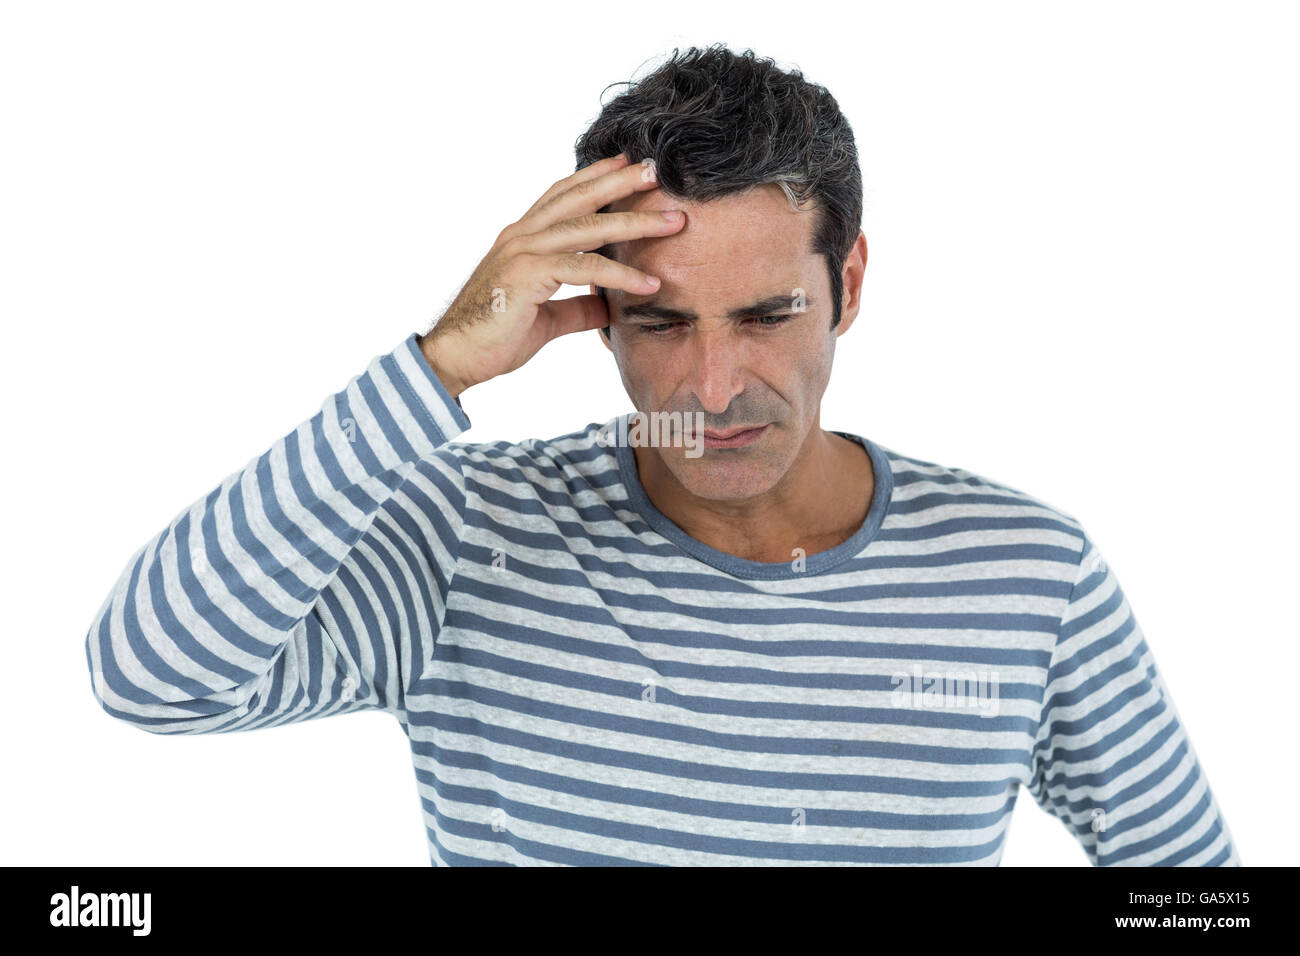 Stressed mid adult man against white background Stock Photo